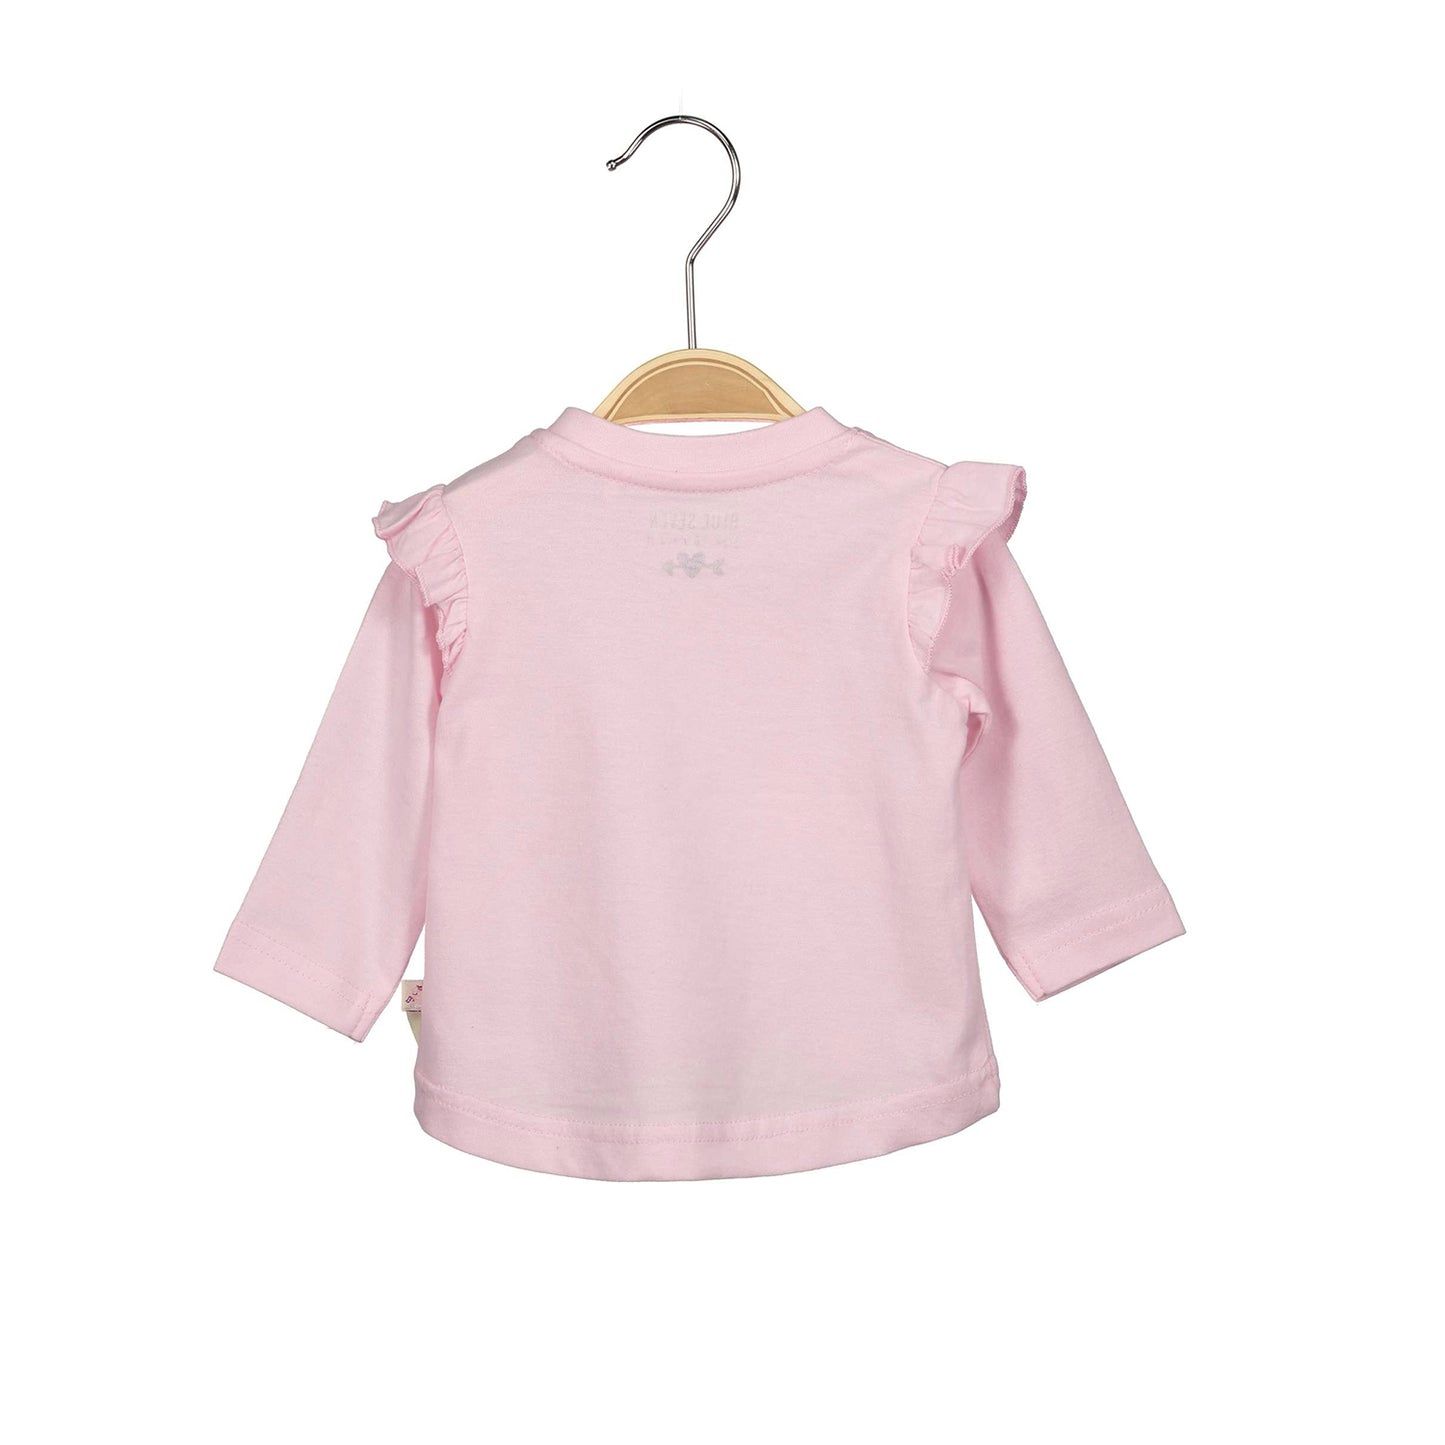 Blue Seven - Pink Long Sleeves T-Shirt For Baby Girl LAST SIZE 0-1 MONTHS